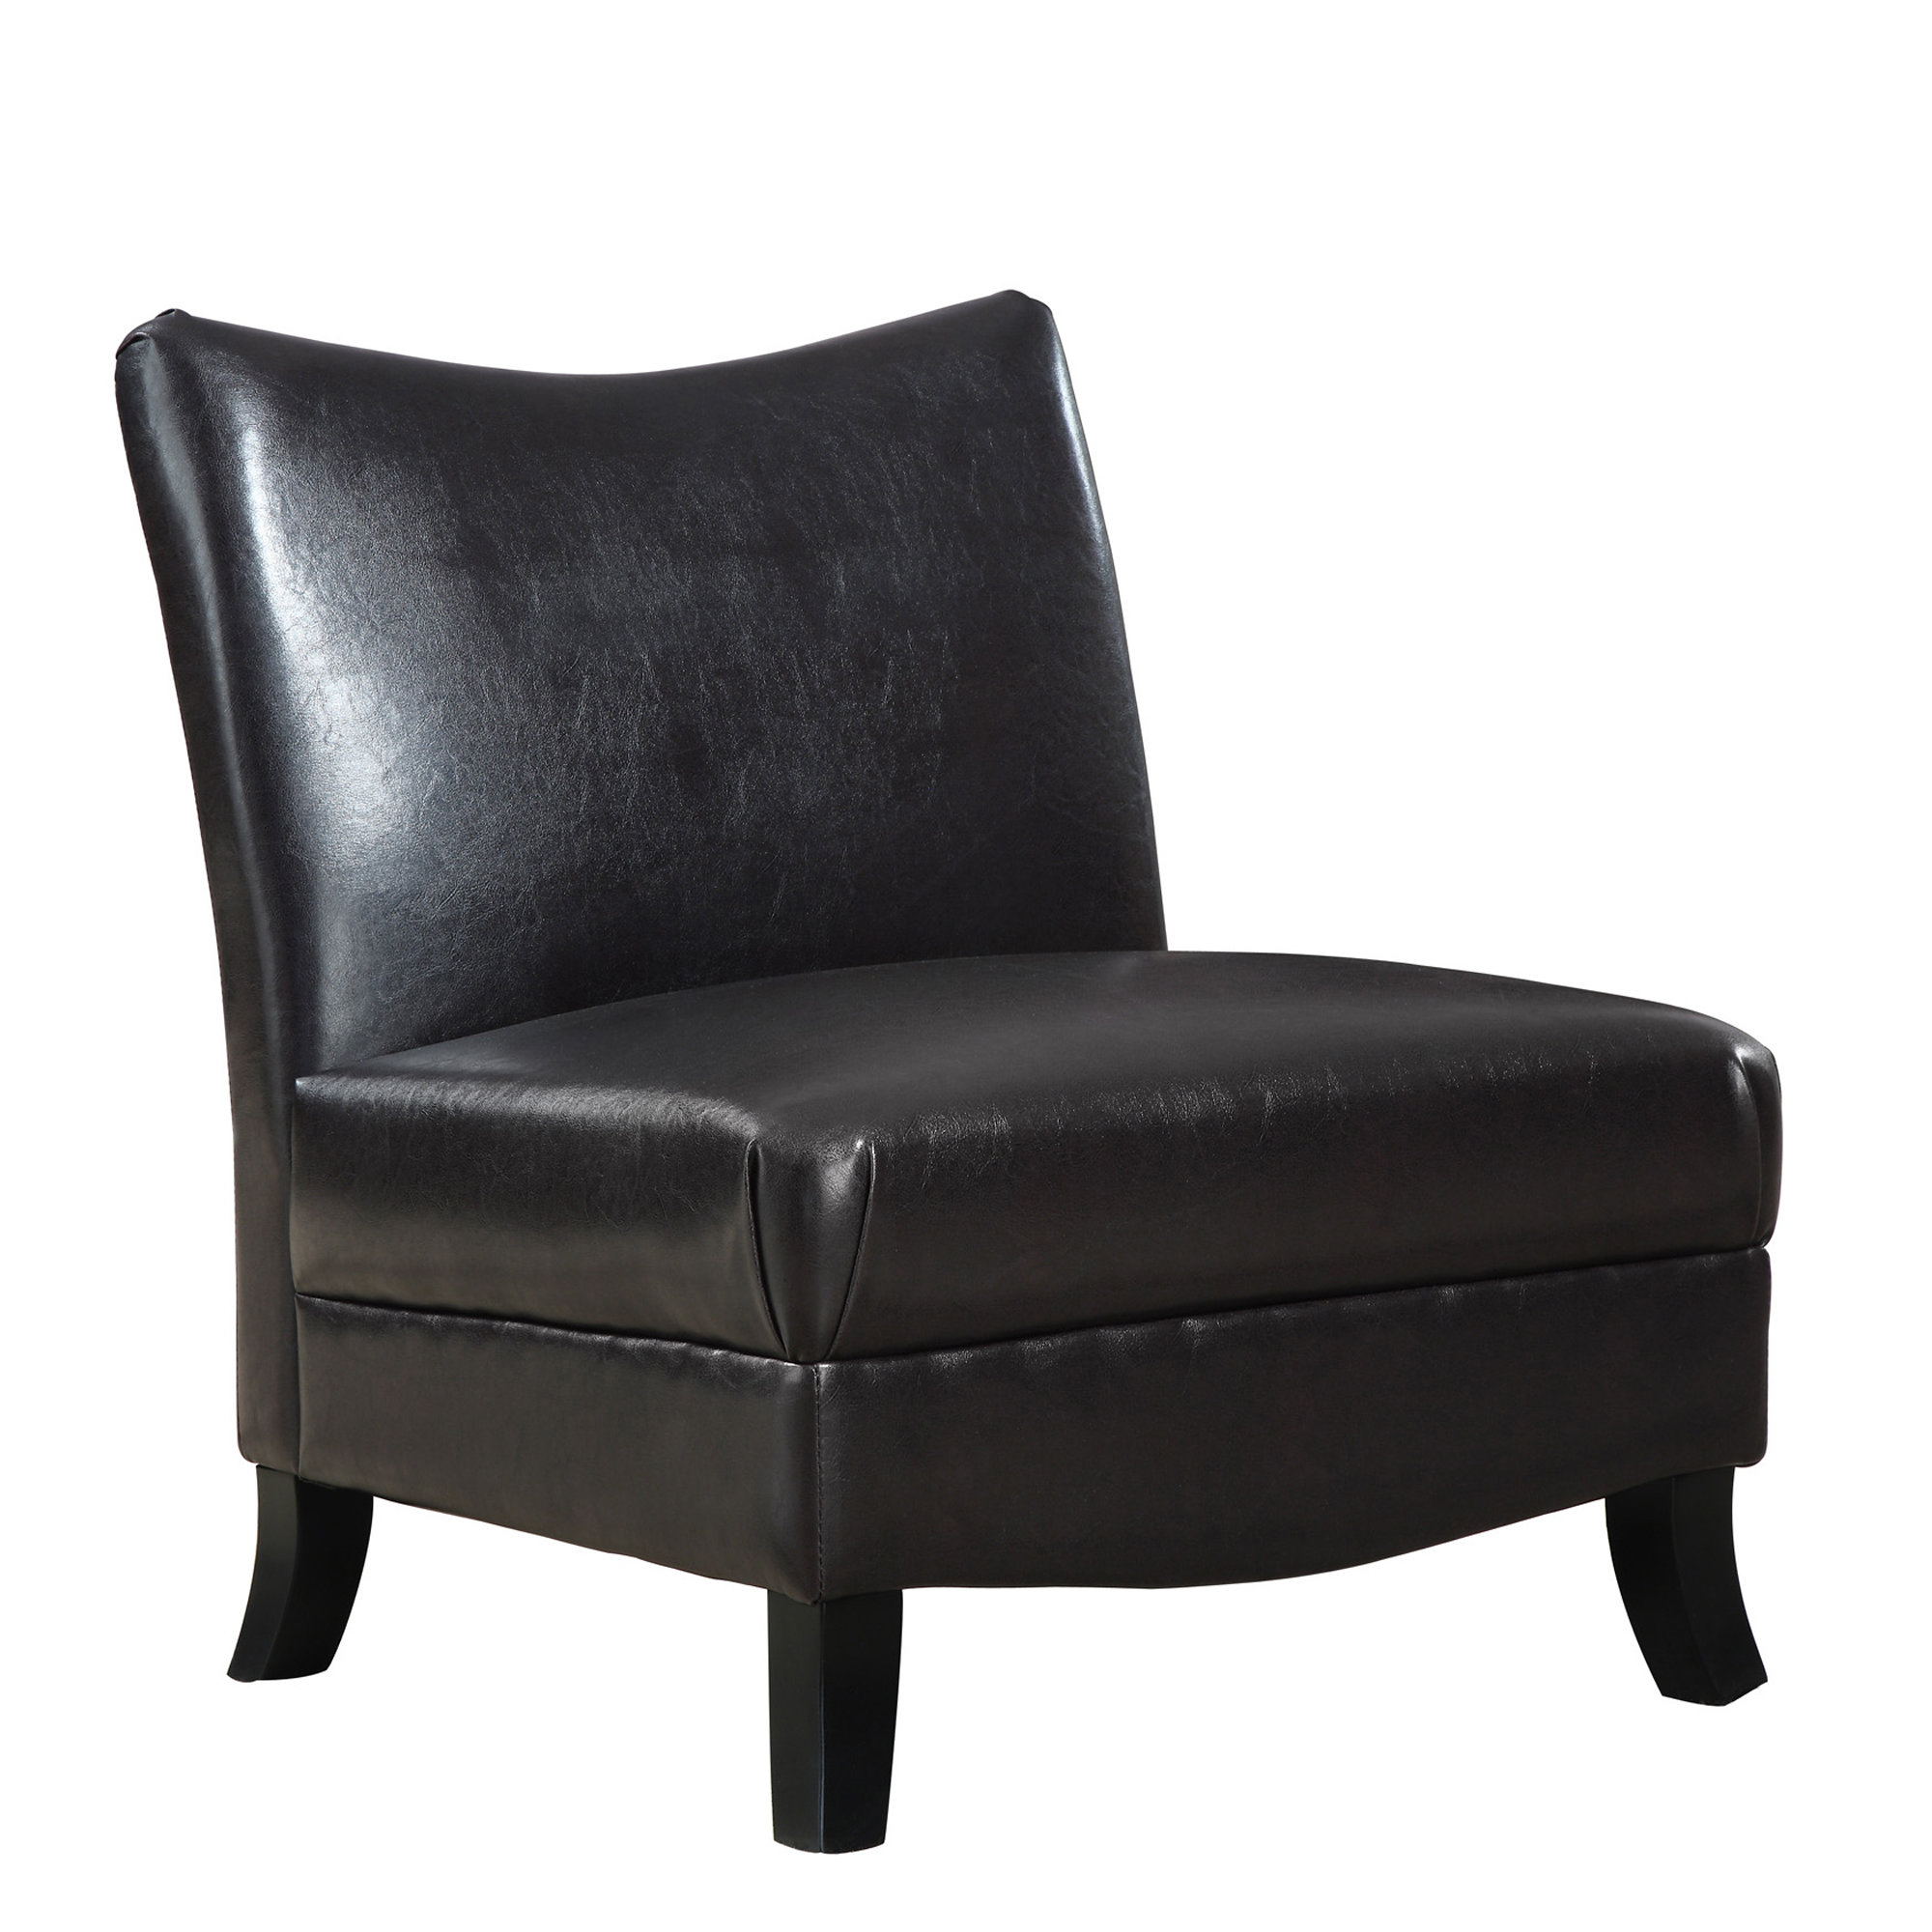 32.5" x 26" x 33" Brown Black Leather-Look Foam Accent Chair with Solid Wood Frame